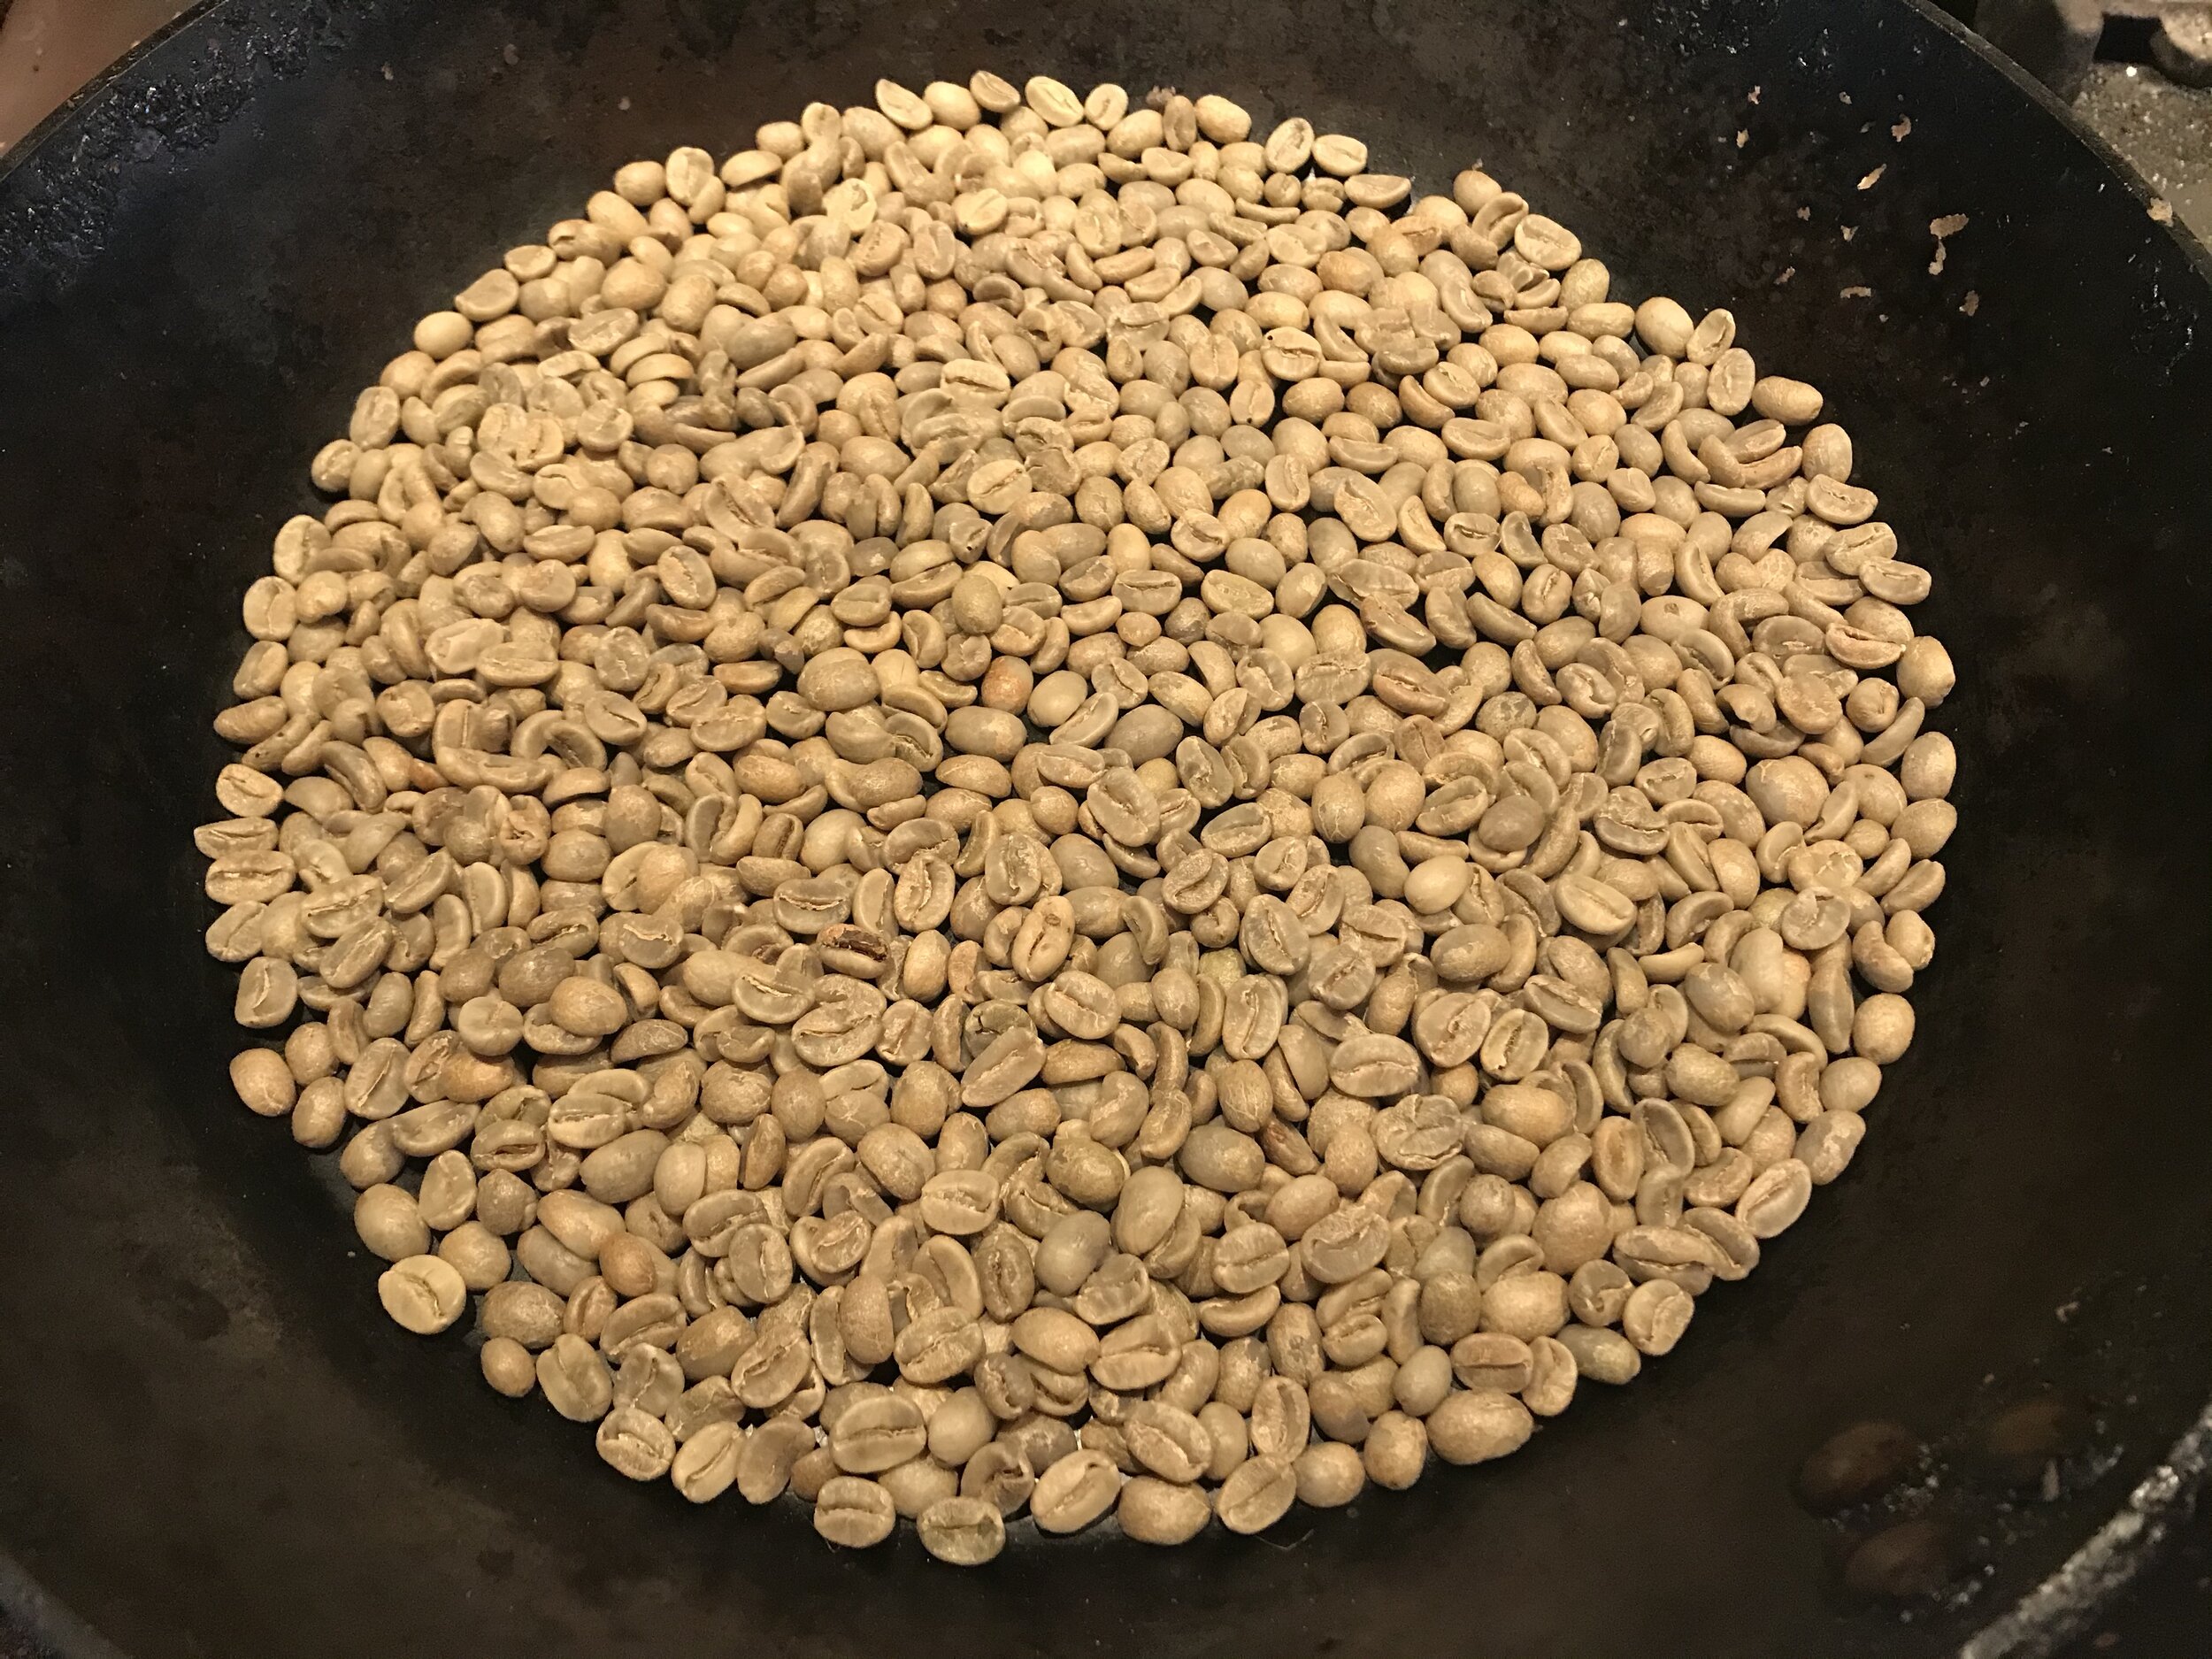  We used a carbon-steel pan, which is lighter than a cast iron pan, and is angled sides allow for easy and constant flipping of the beans for an even roast. We use a full burner with the exhaust fan on high until the beans turn brown, and then we low